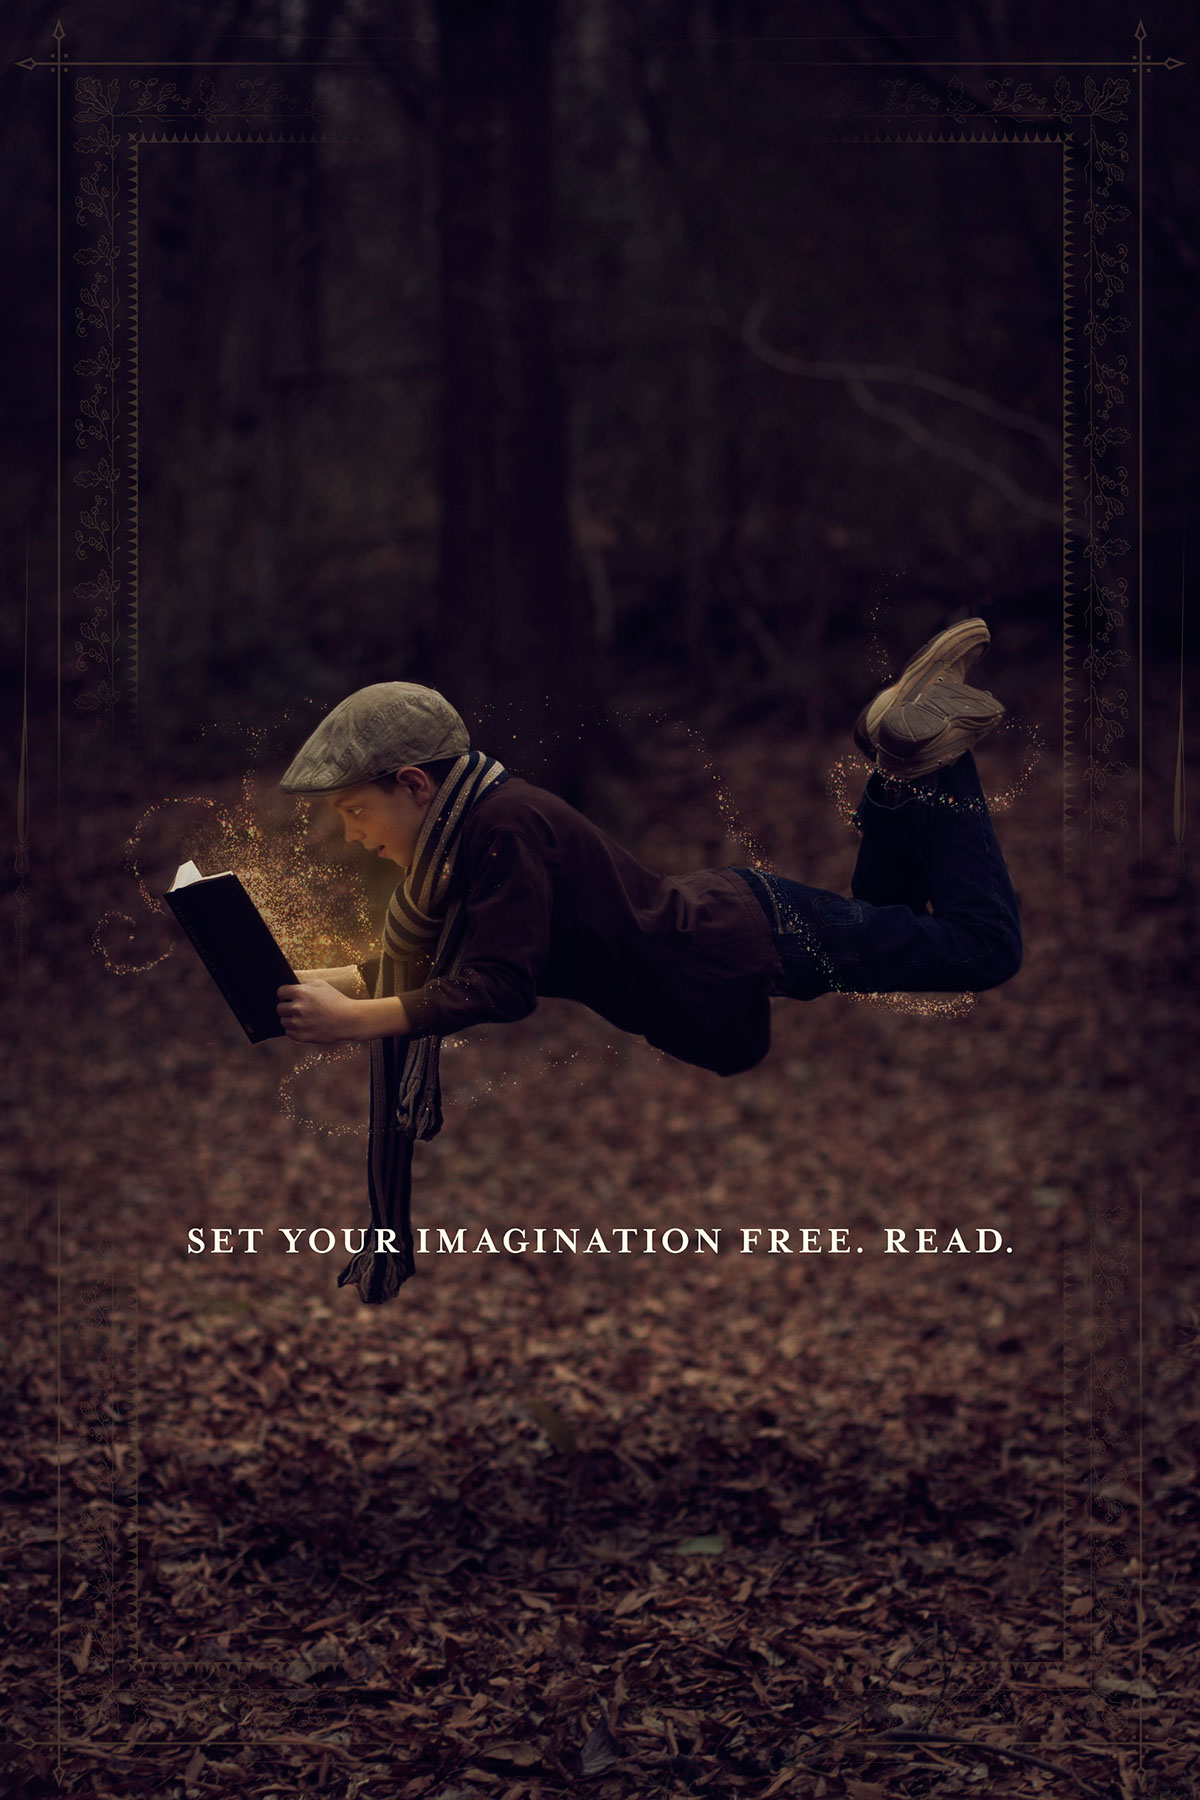 photo manipulation Awards American Advertising Awards Addys children Reading imagination campaign photoshop levitation once upon a time read